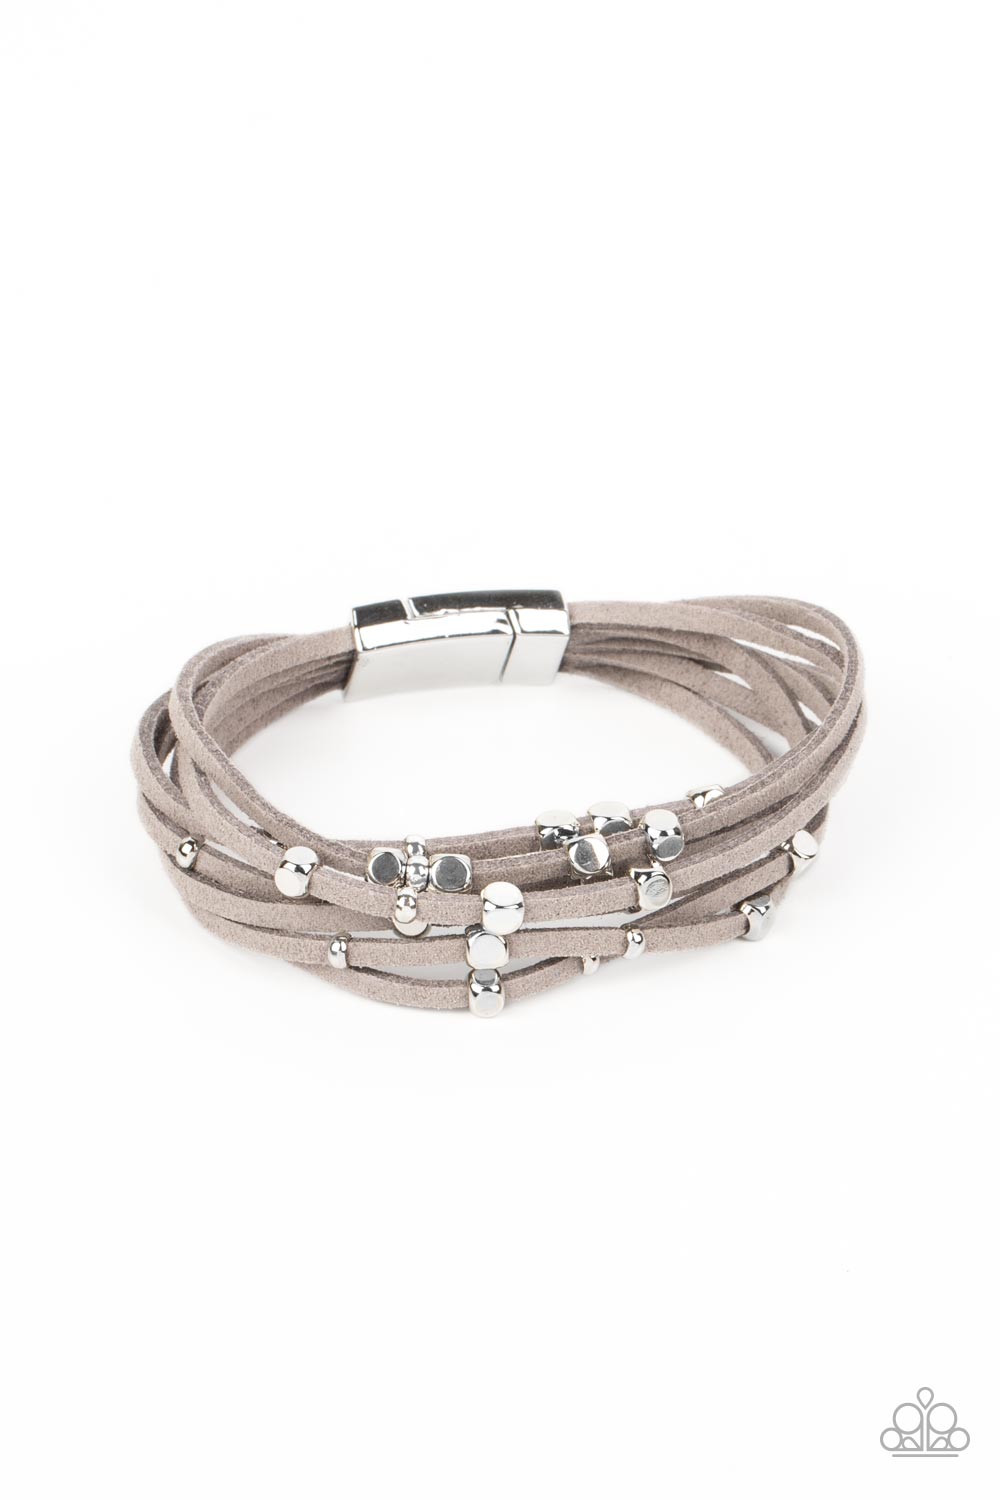 Clustered Constellations - silver - Paparazzi bracelet